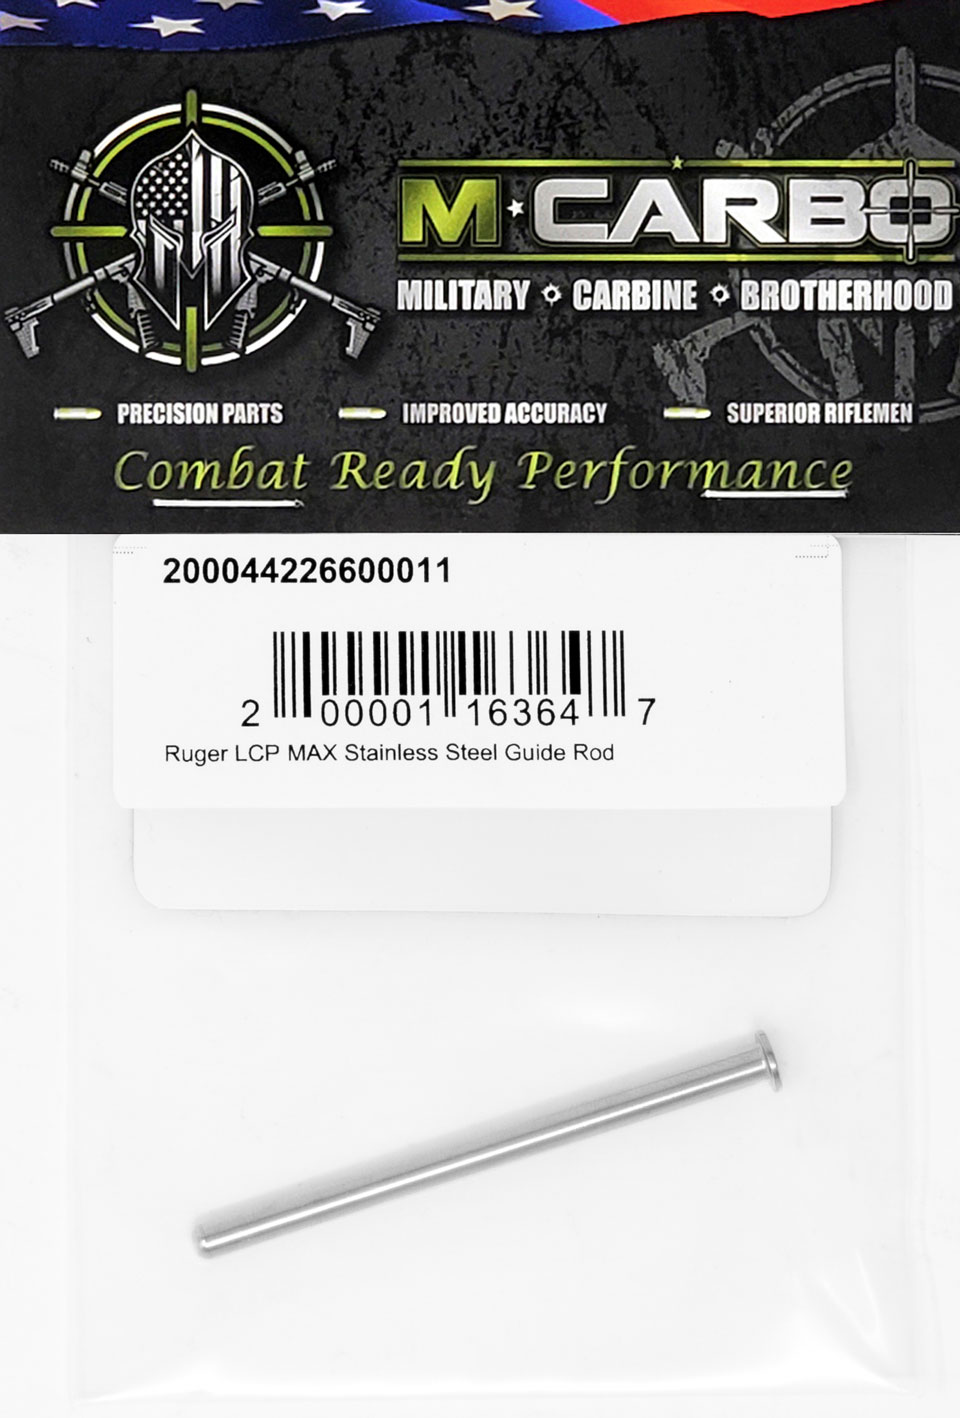 Packaged Ruger LCP MAX Stainless Steel Guide Rod M*CARBO